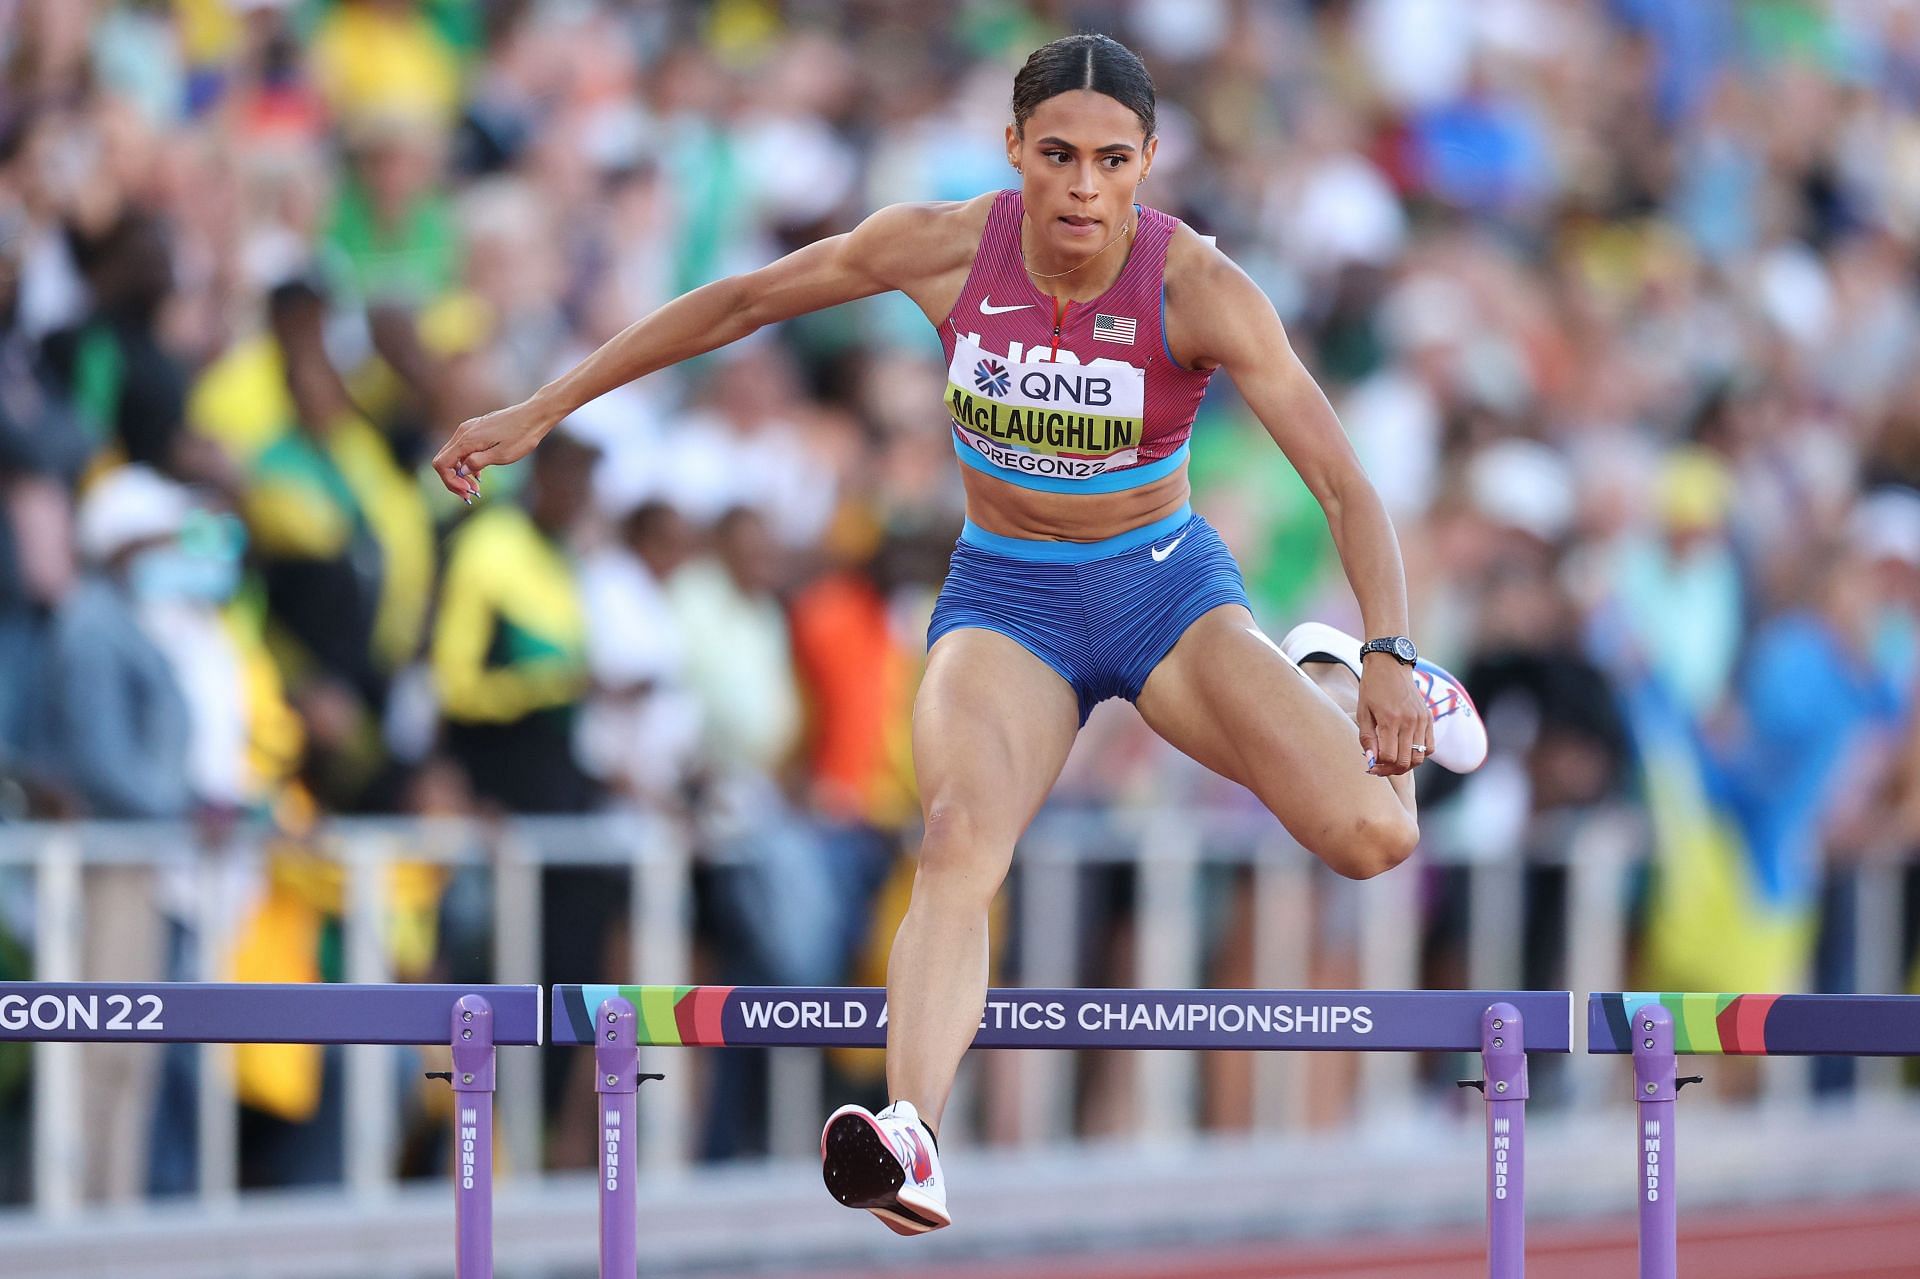 Sydney McLaughlin of Team United States competes in the Women&#039;s 400m Hurdles Final at the World Athletics Championships 2022 in Eugene, Oregon.